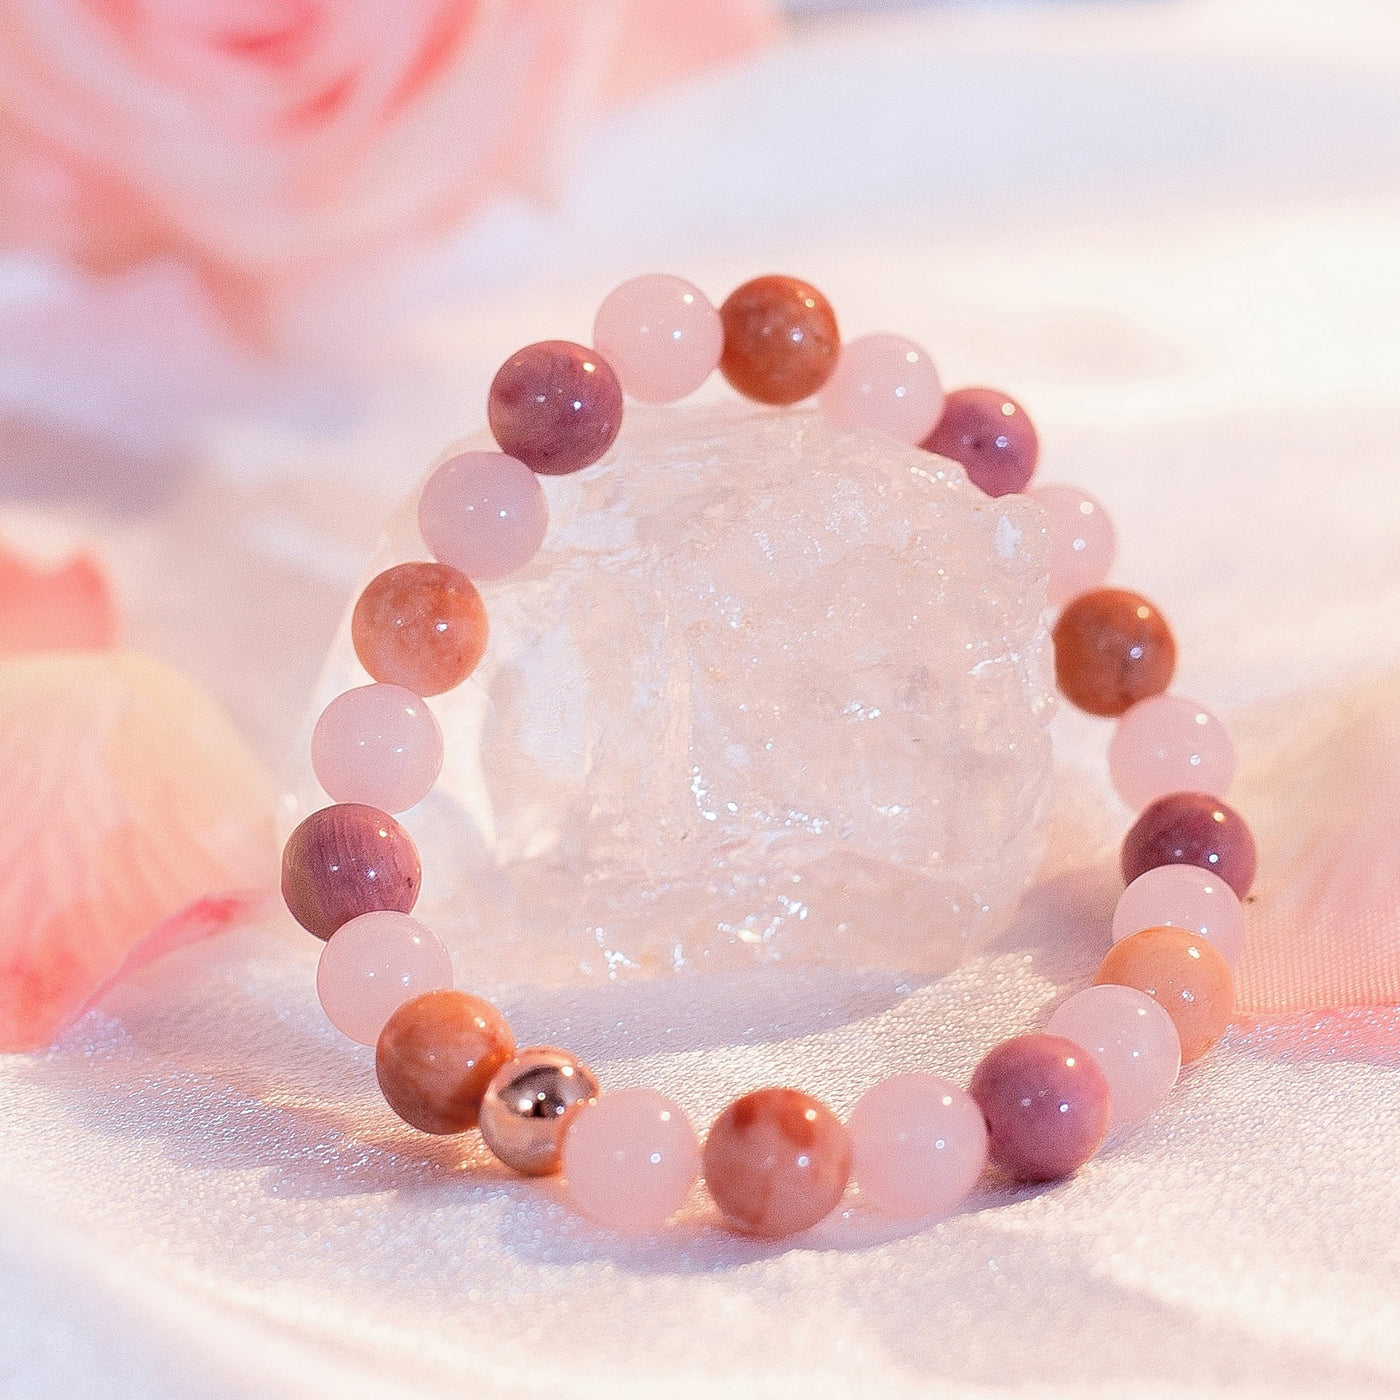 Pink Crystal Bracelet | Crystal Bracelet for Women, Love Bracelet | Crystals for Love Self Confidence Courage Attract Romance